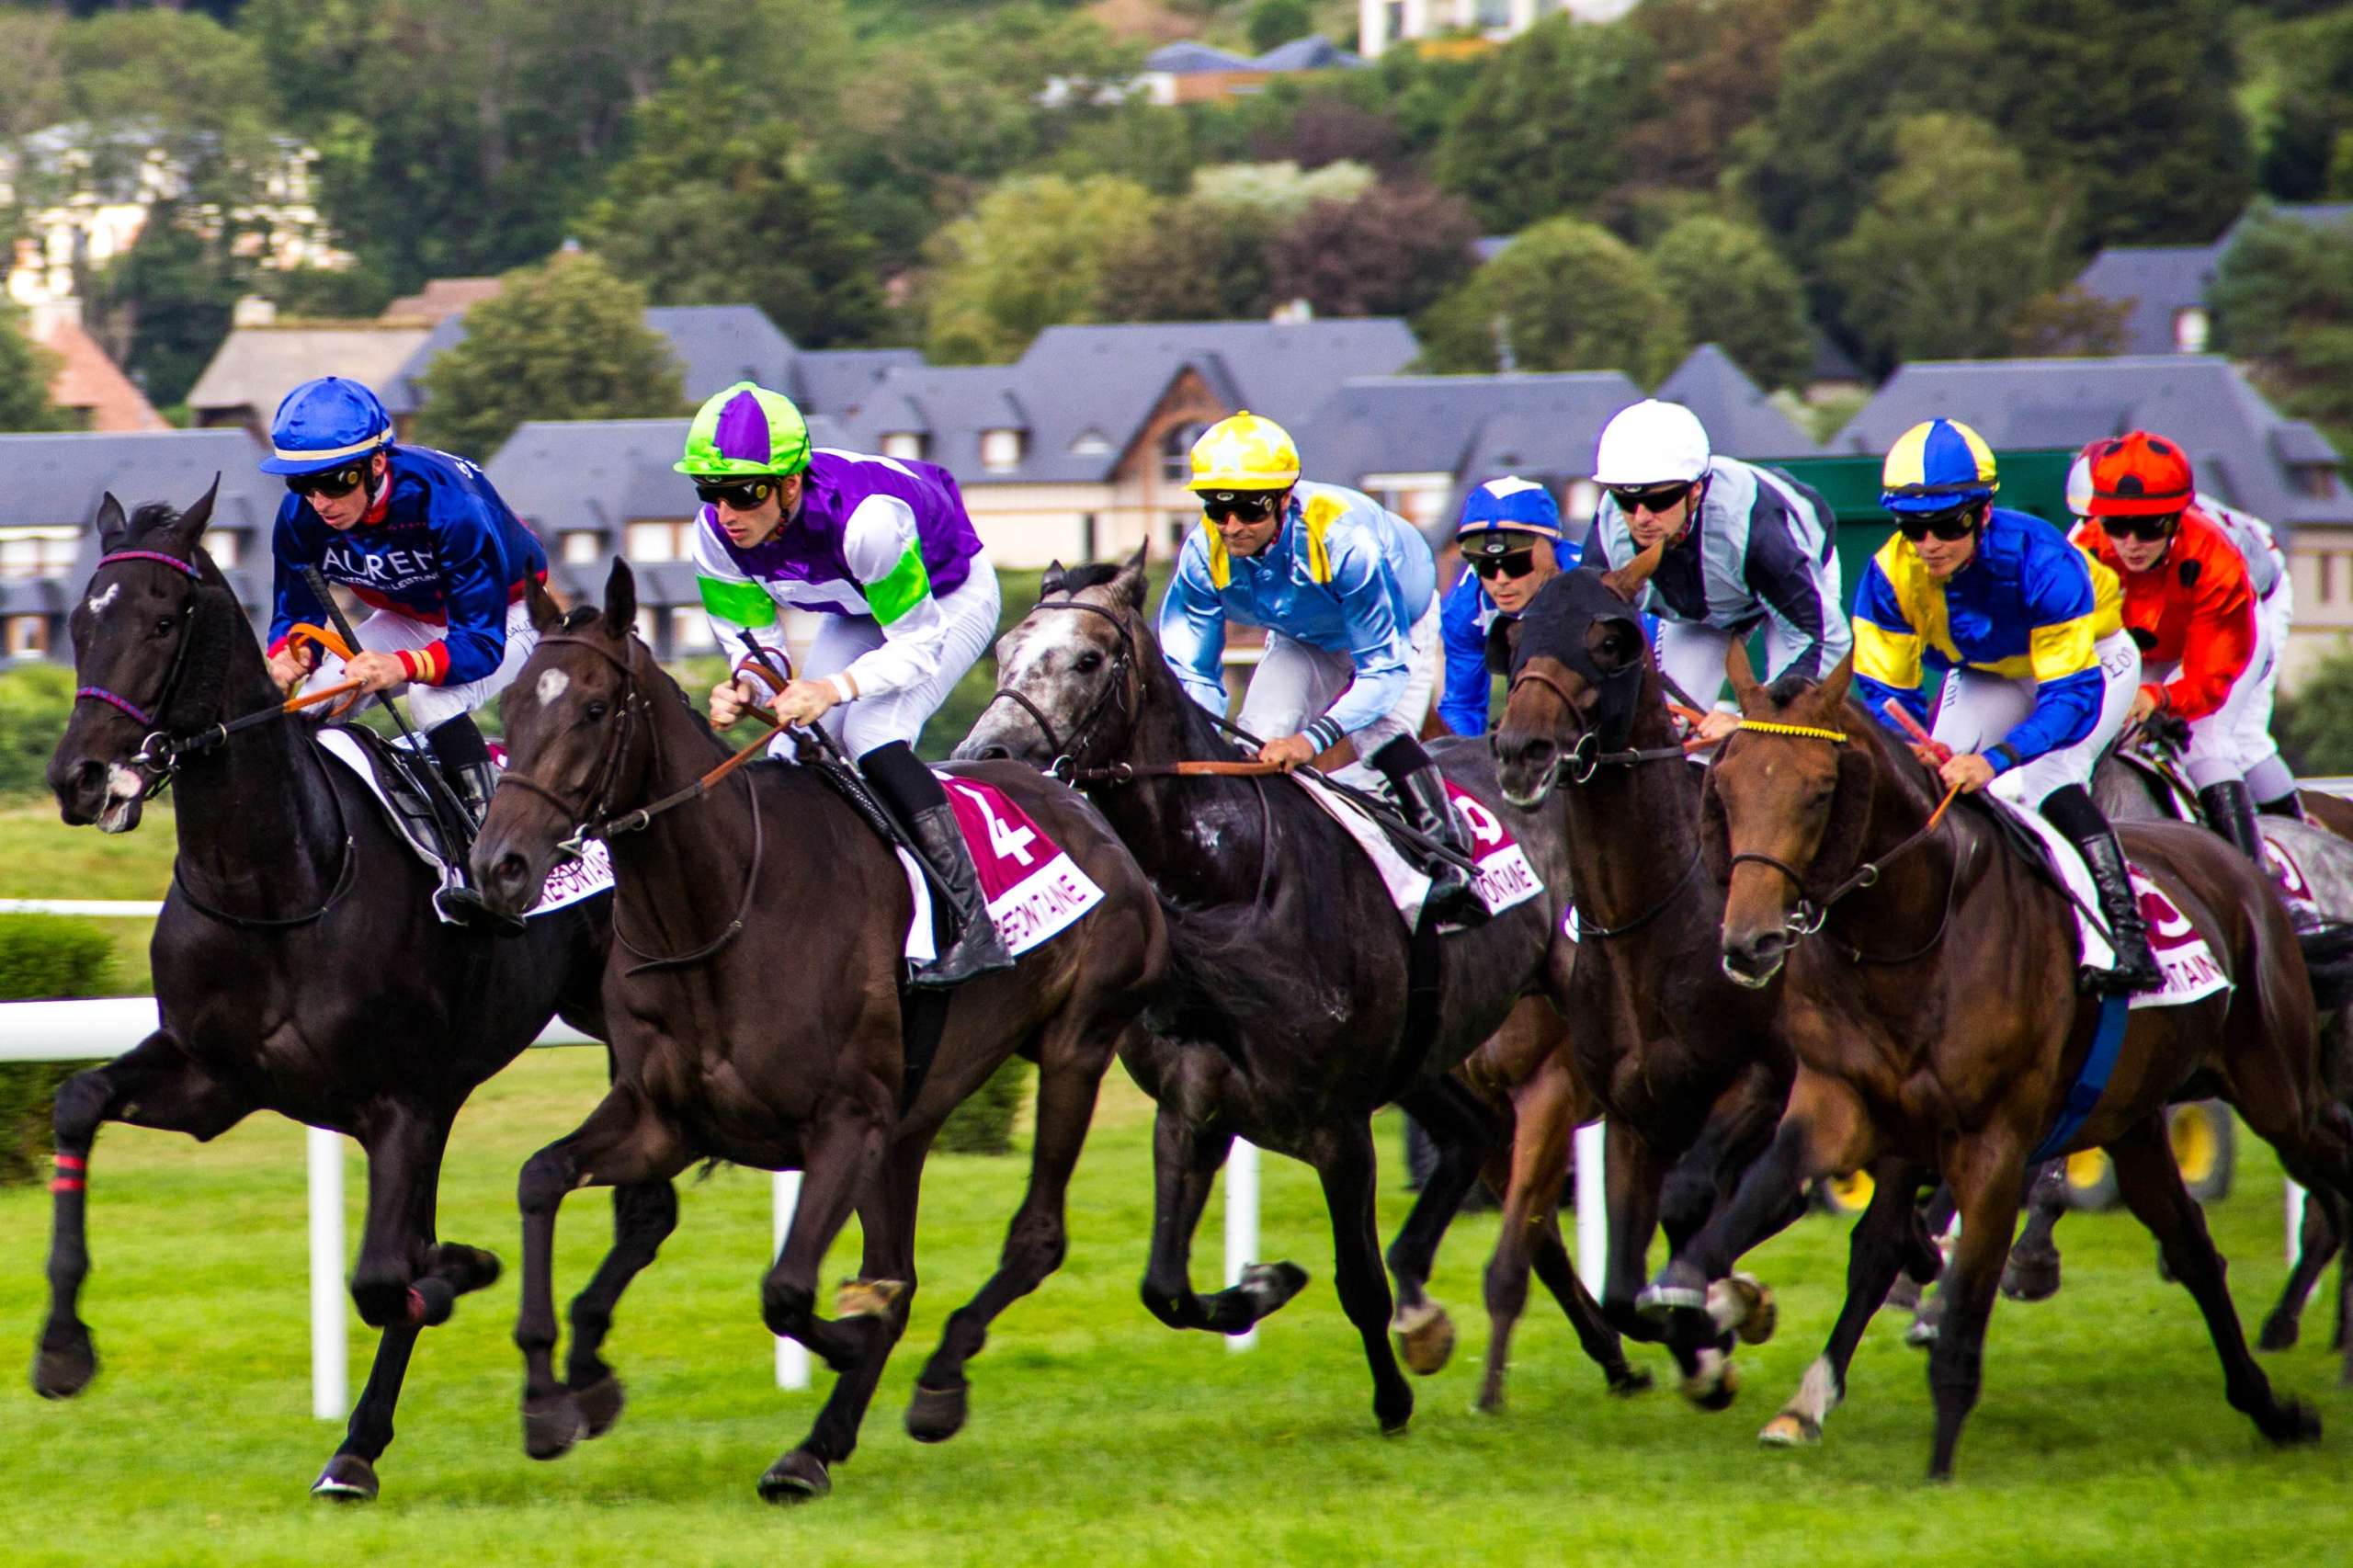 Galway Horse Racing Festival